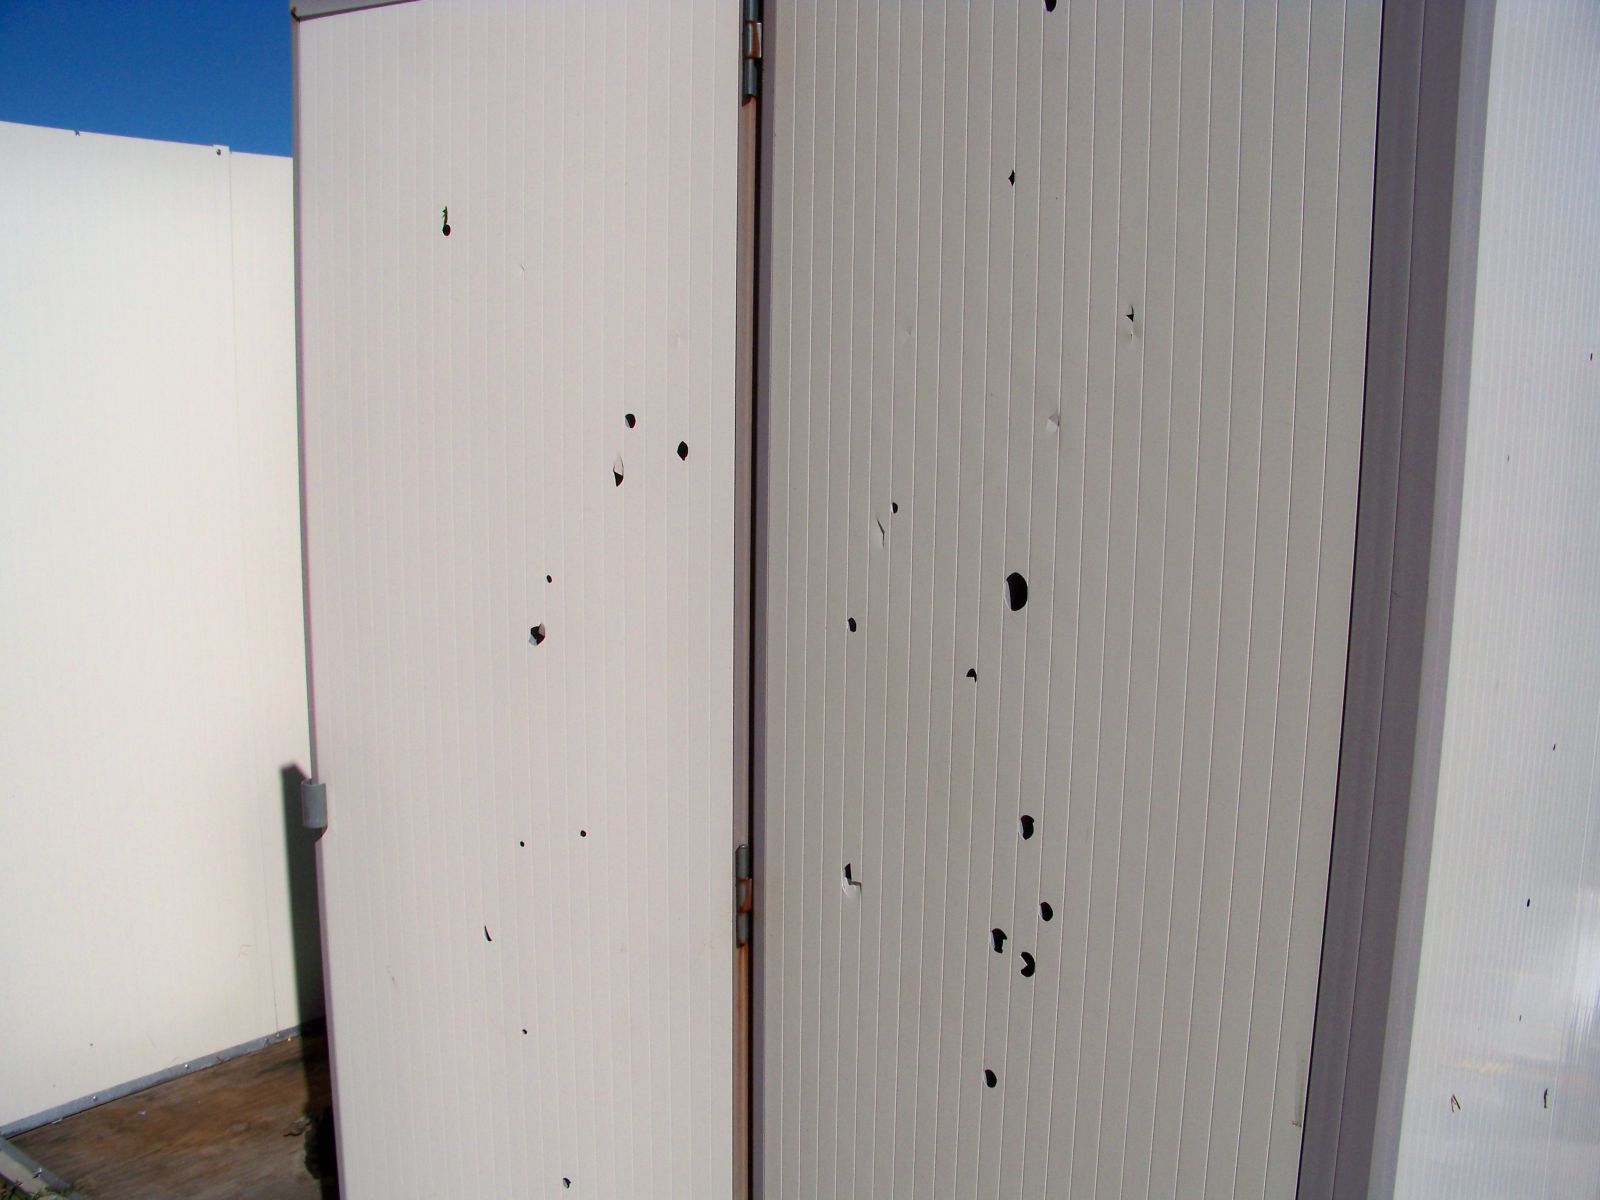 Flying derbis create numerous small holes in this storage shed.